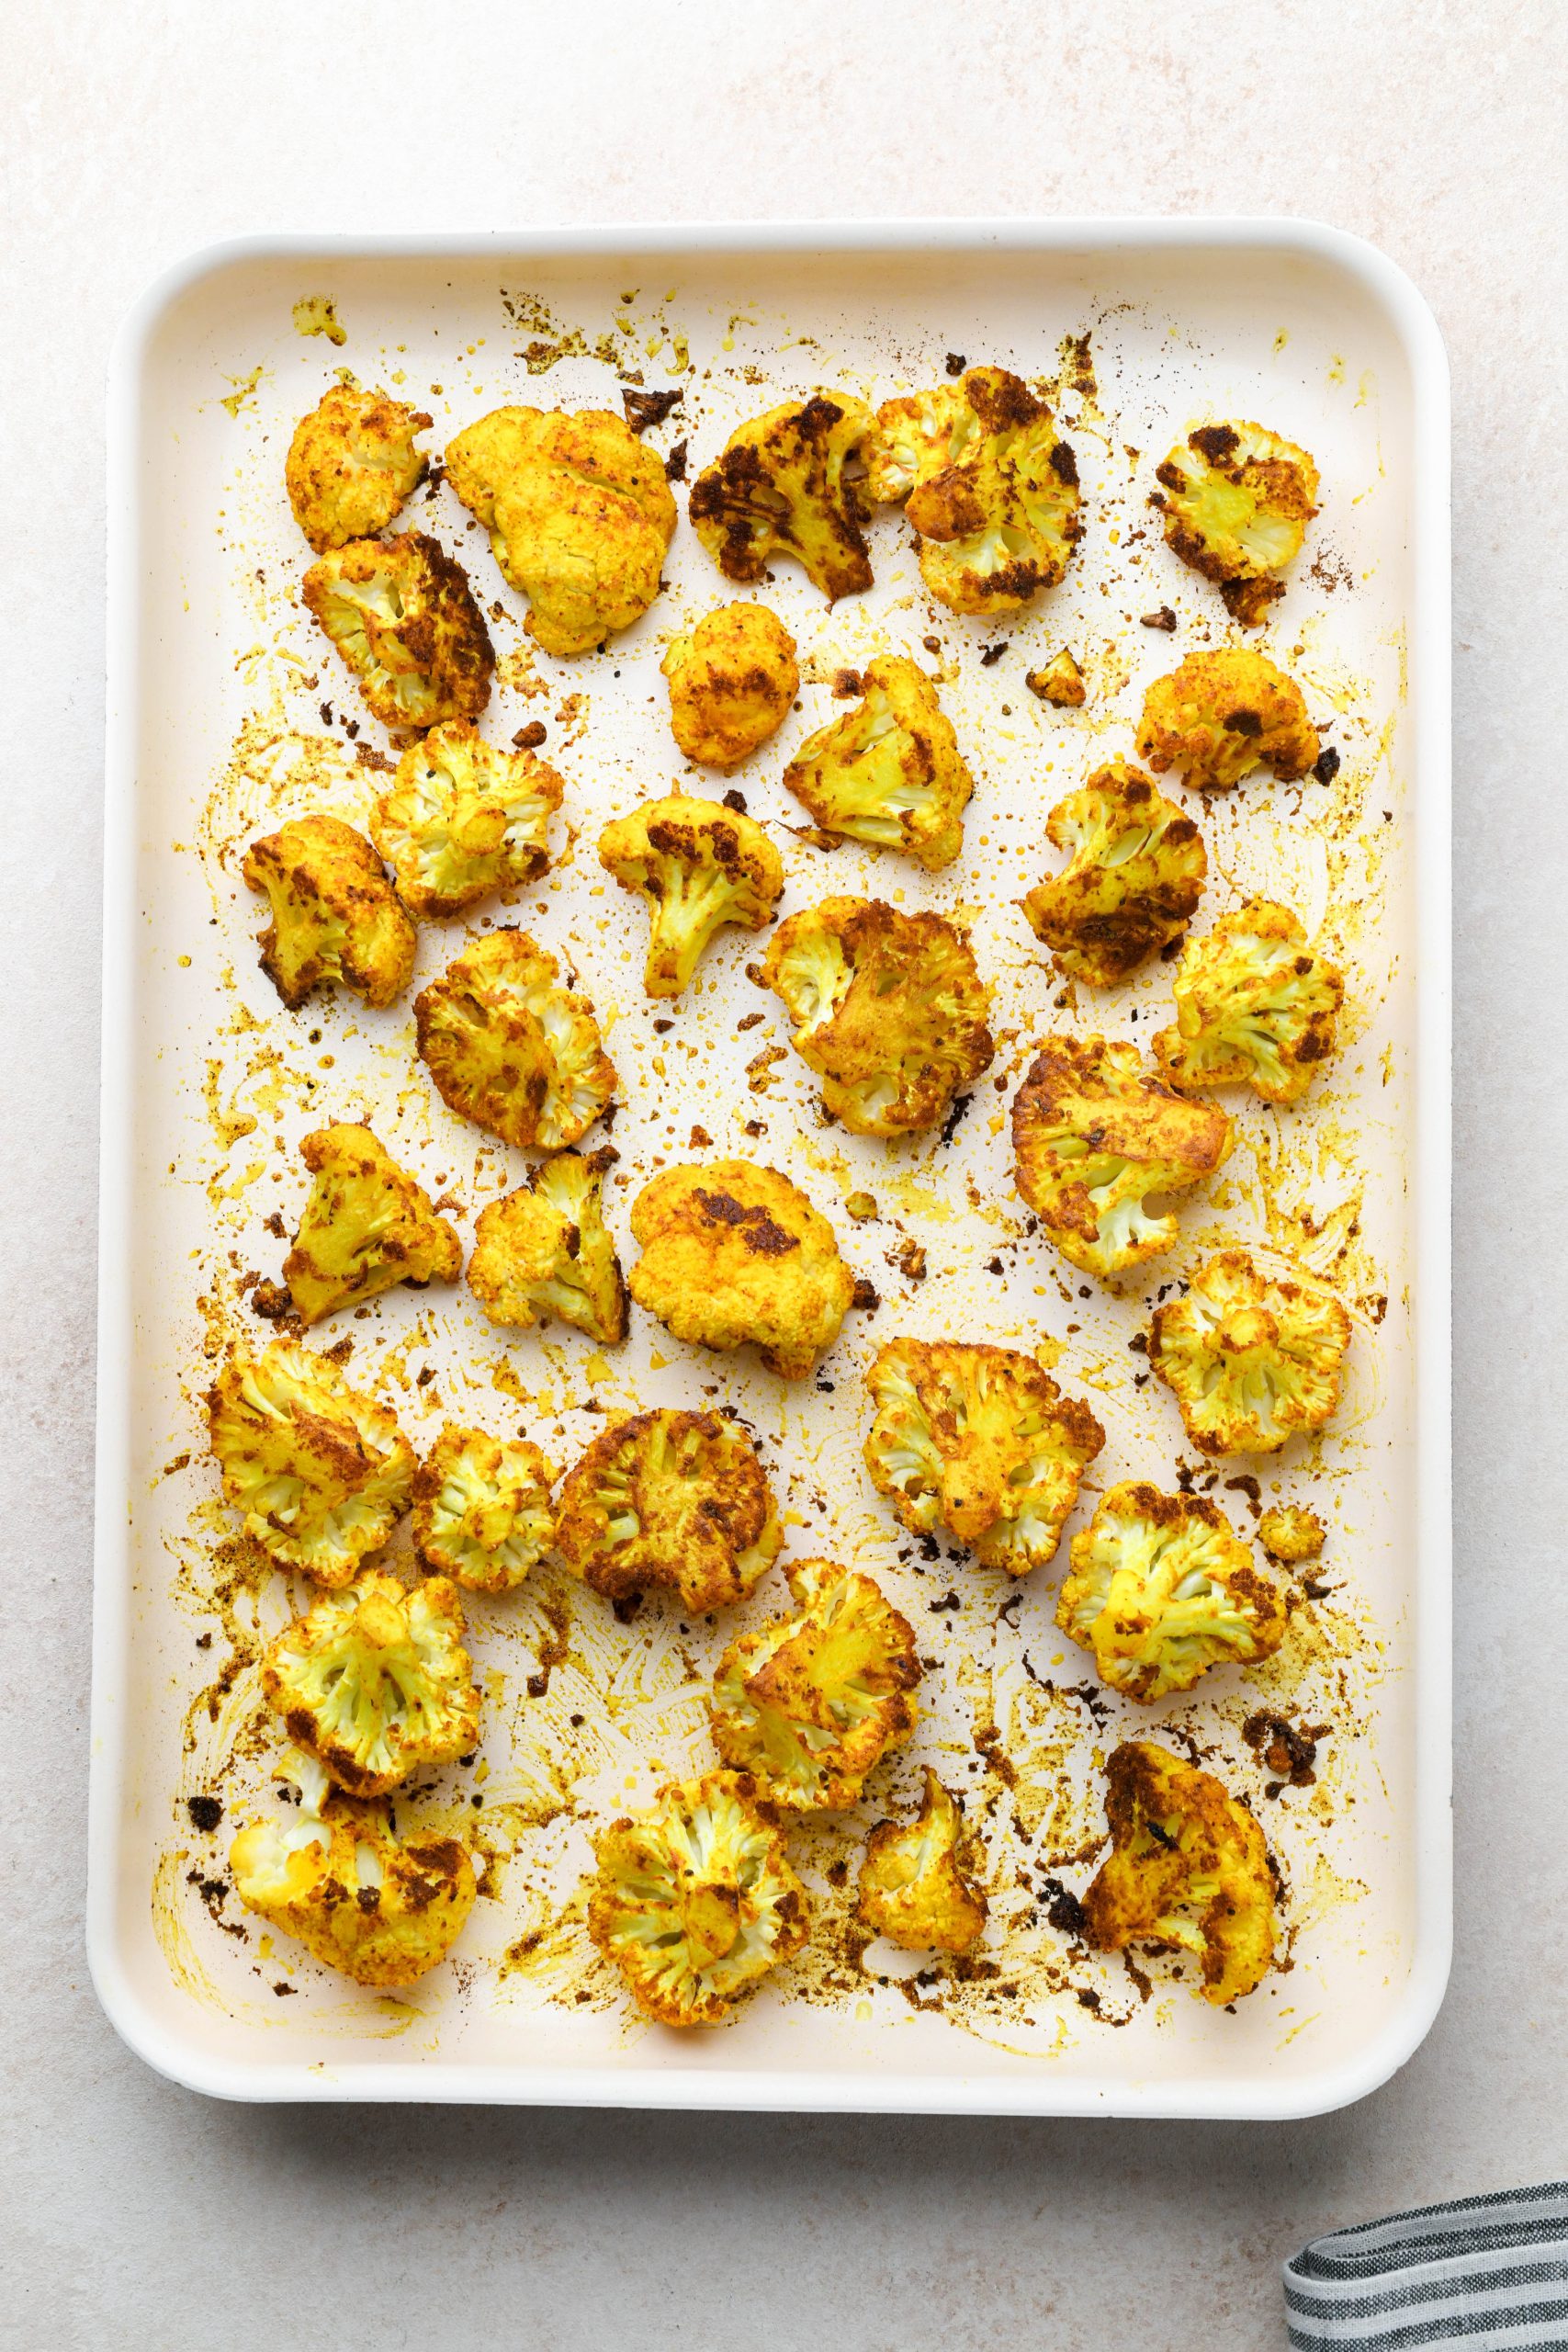 How to make Turmeric Roasted Cauliflower: Cauliflower florets tossed with oil and spices after roasting.